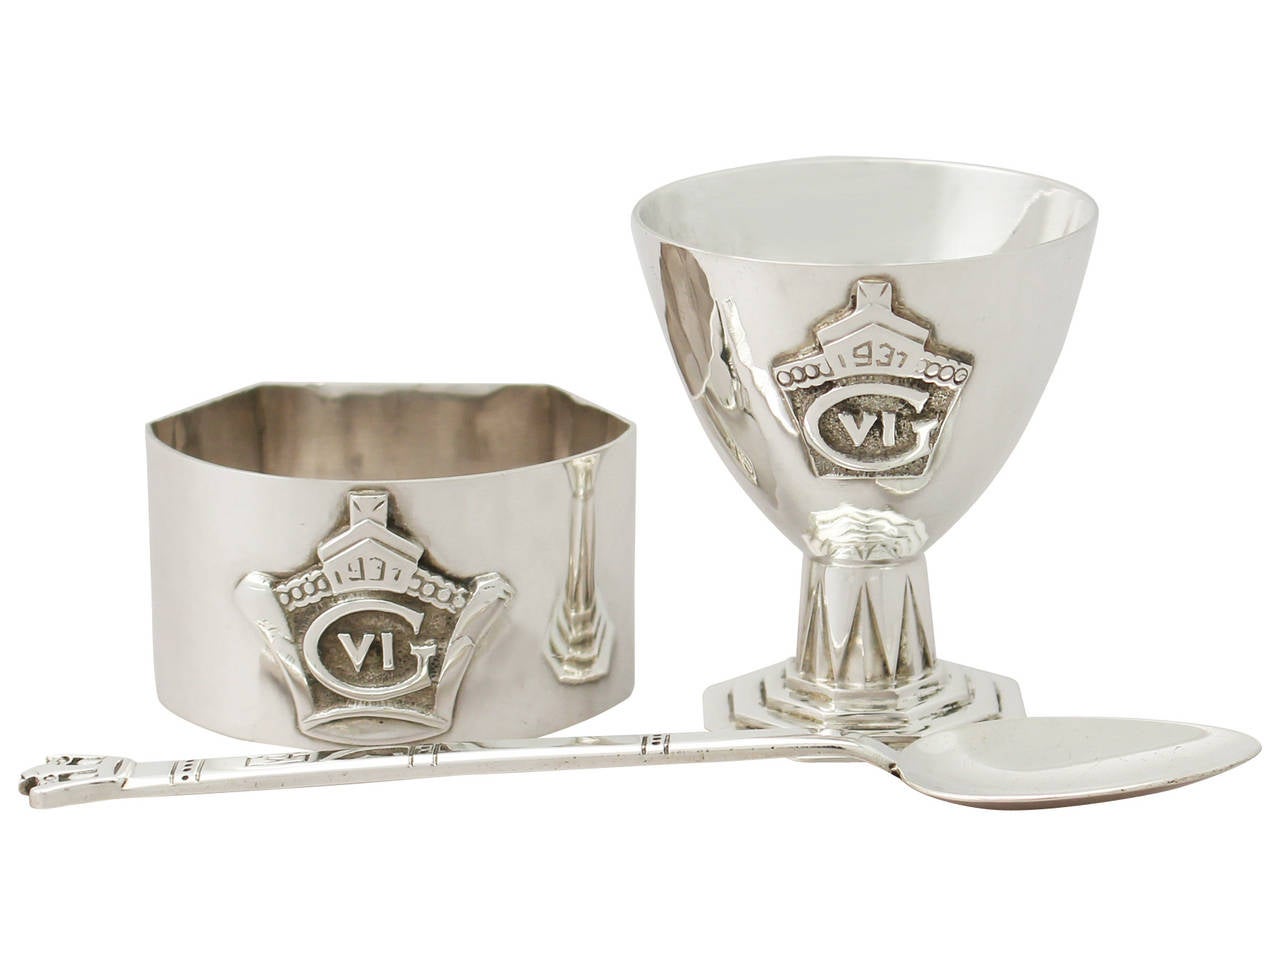 An exceptional, fine and impressive antique George VI English sterling silver christening set in the Art Deco style, boxed; an addition to our collection of silver christening gifts.

This exceptional antique George VI sterling silver christening